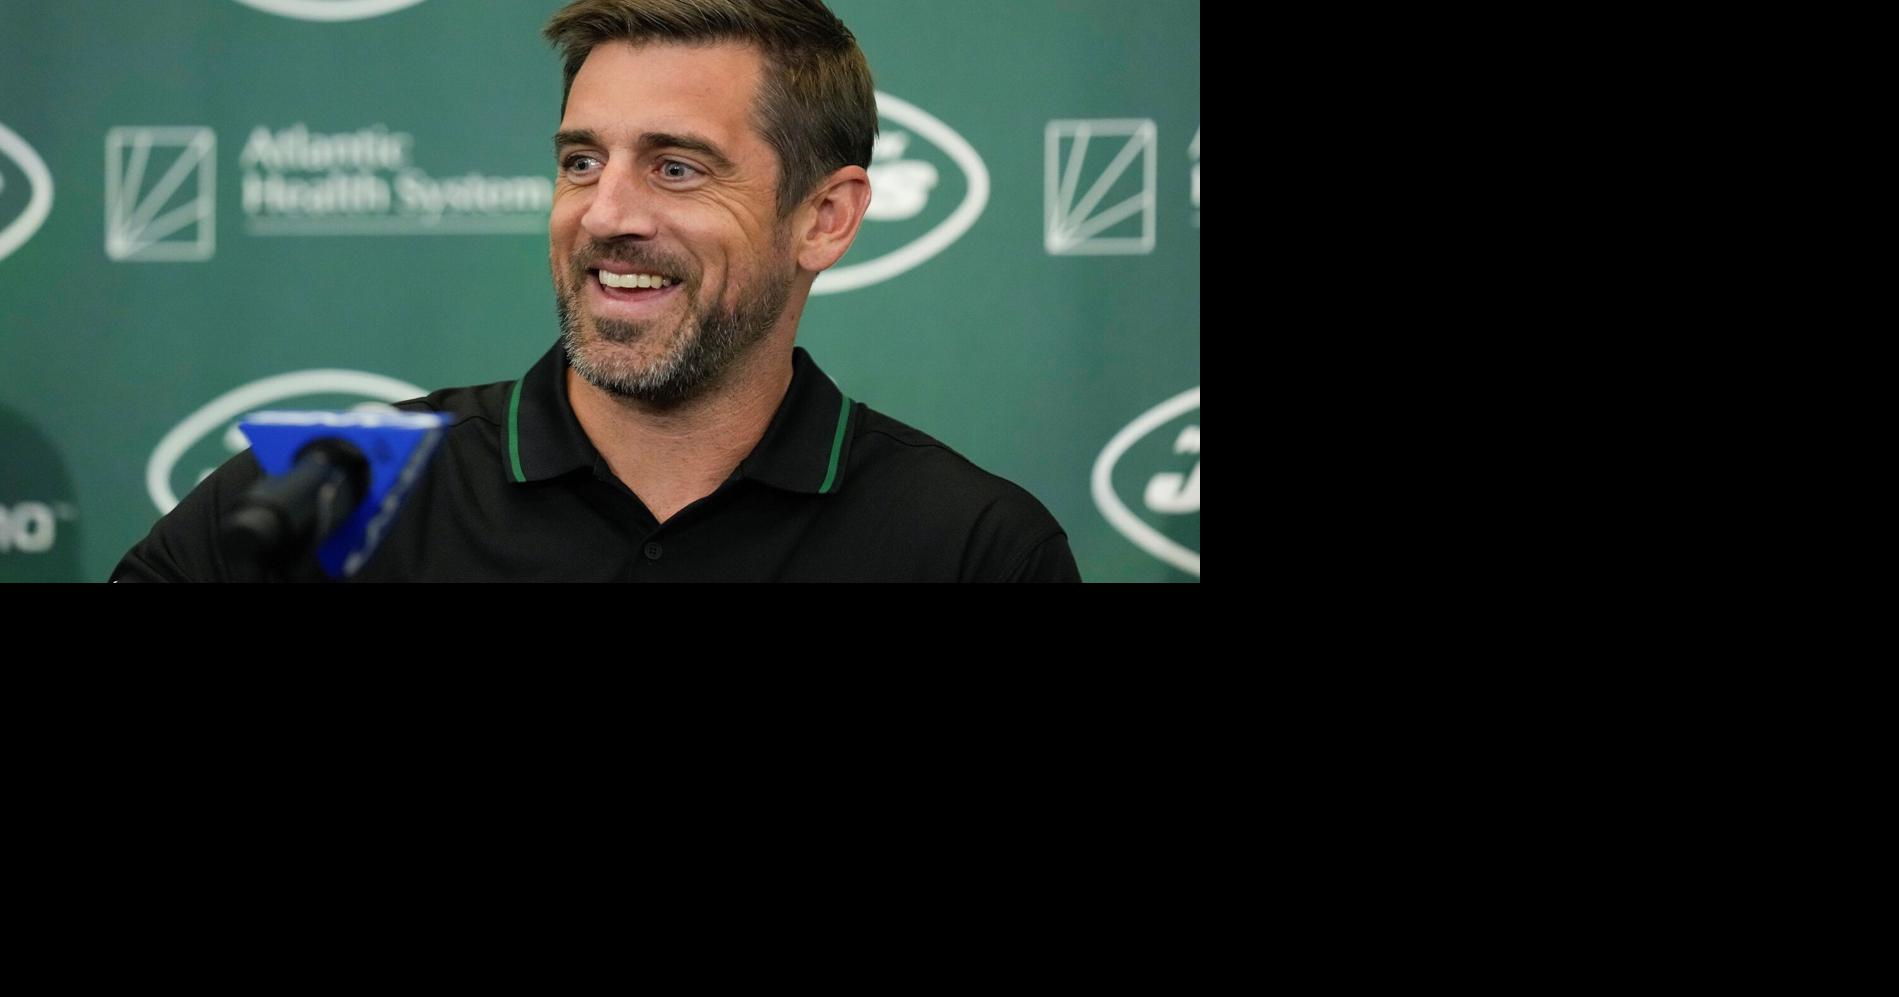 Aaron Rodgers excited about 'new adventure' with Jets